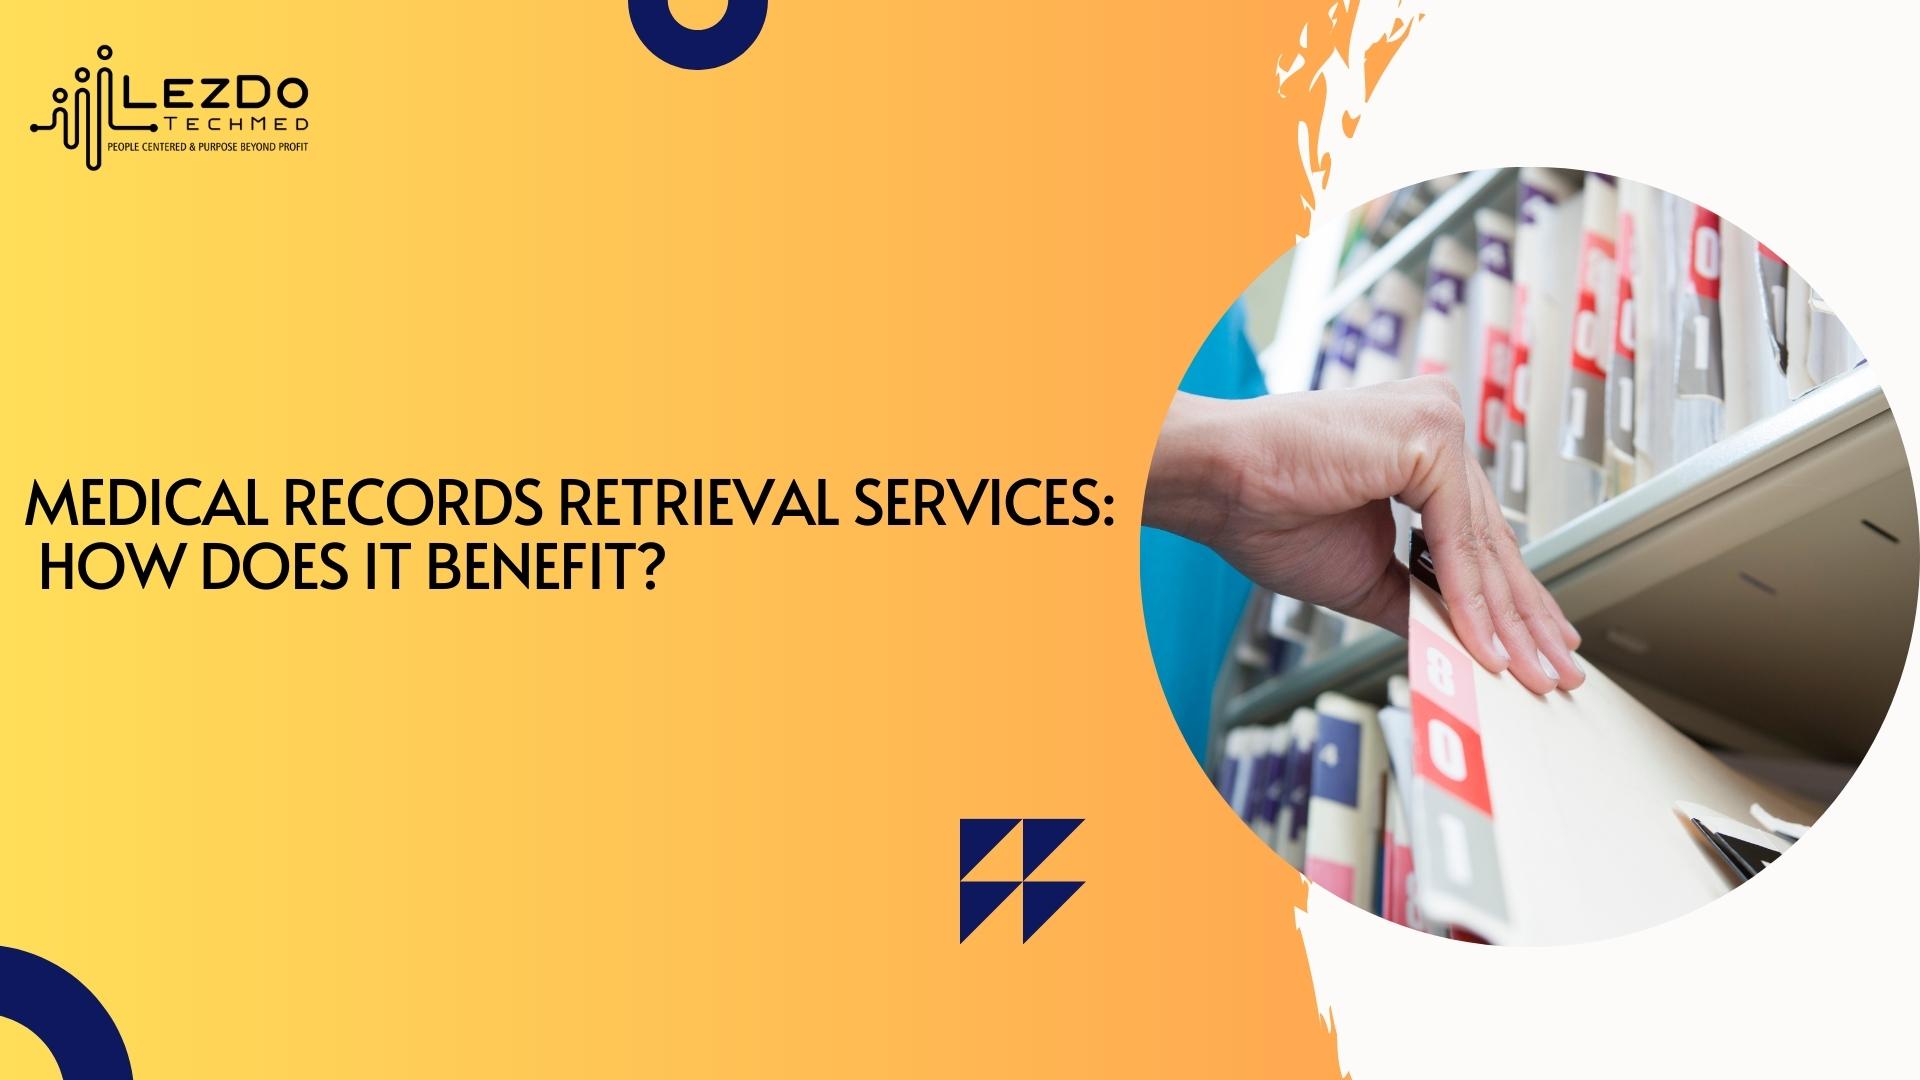 Medical Records Retrieval Services: How Does it Benefit?